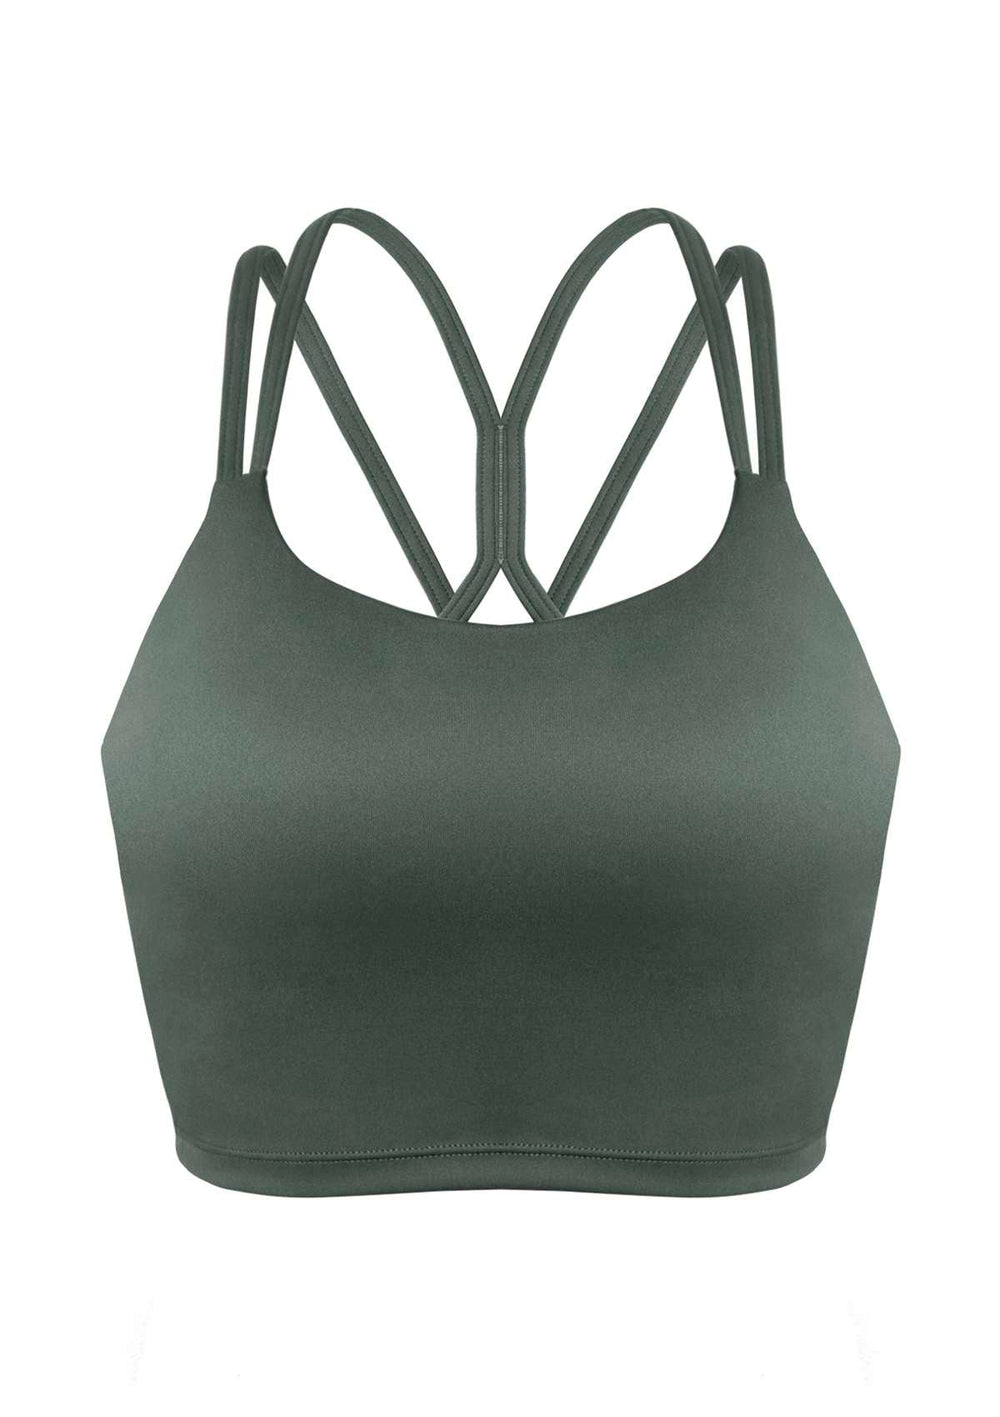 ZYIA ACTIVE WOMEN'S Grid Strappy Ladder Sports Bra Olive Green Size XXL NEW  £20.03 - PicClick UK